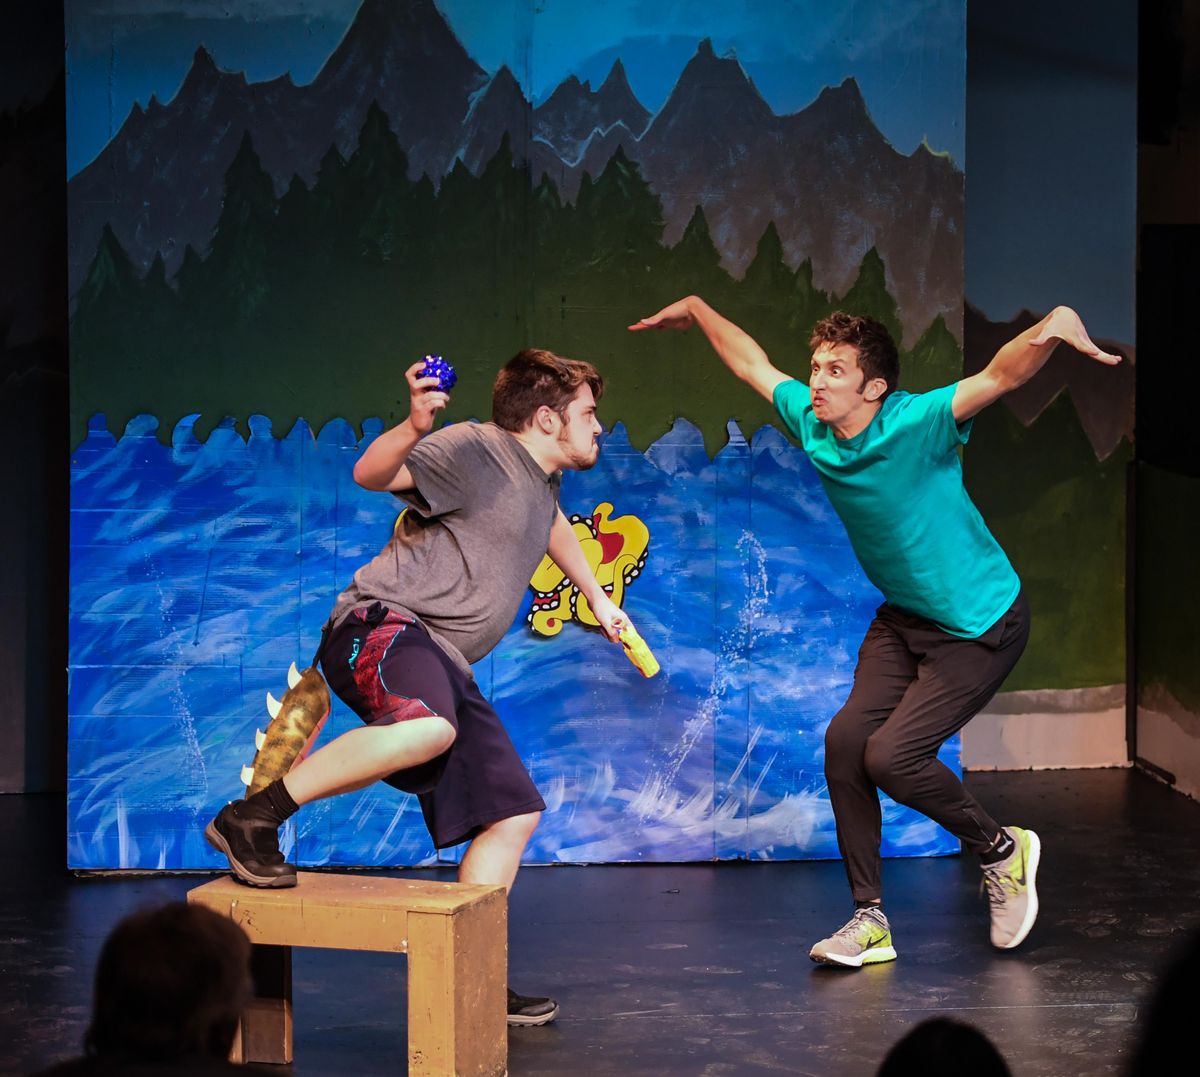 Dane Larson, as  dinosaur, right, and Jordan Baird, as the dragon, perform Landon Gamache’s “The Dinosaur and the Dragon” on opening night Thursday, May 10, 2018, during the Kids Corner Playwright Festival at  Stage Left Theater. (Dan Pelle / DAN PELLE/The Spokesman-Review)